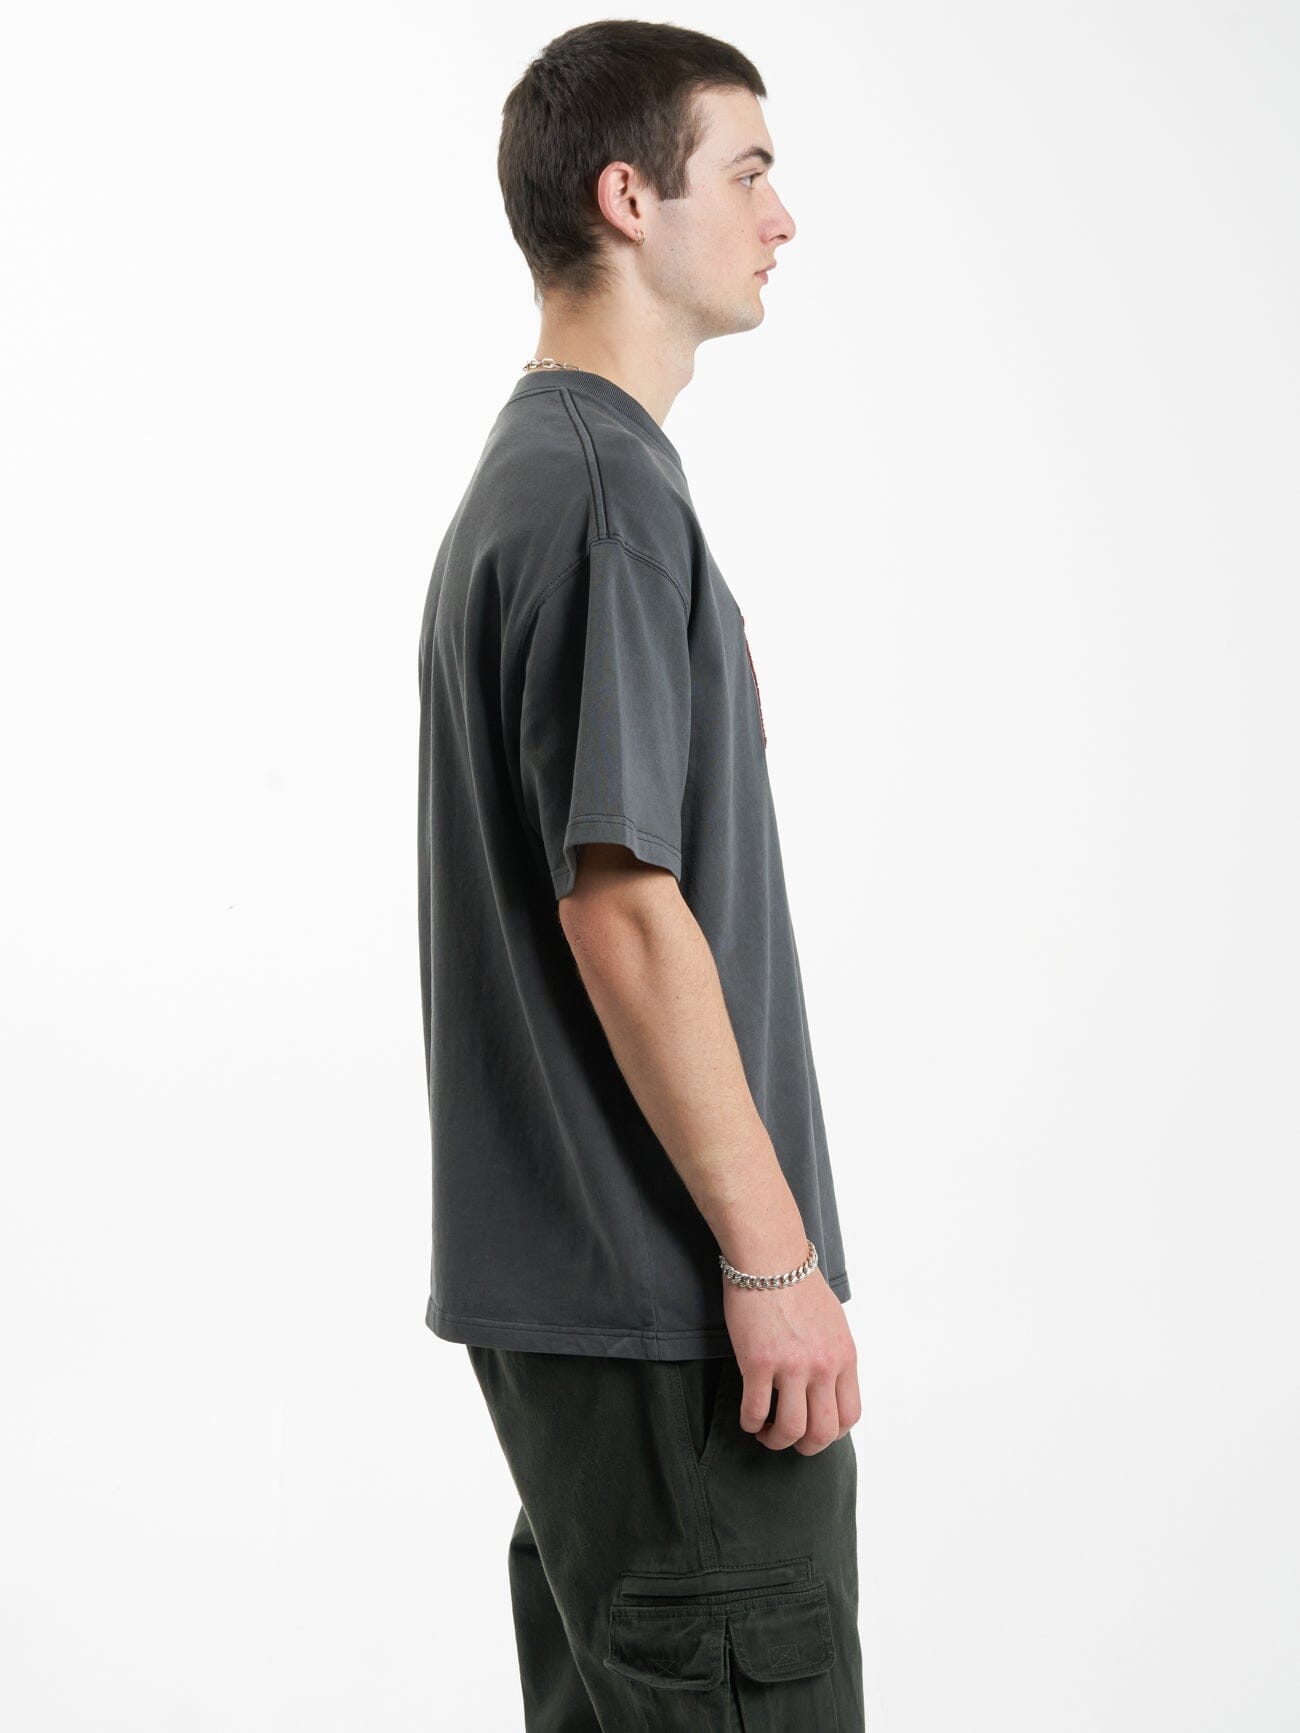 Stand Firm Box Fit Oversize Tee - Merch Black